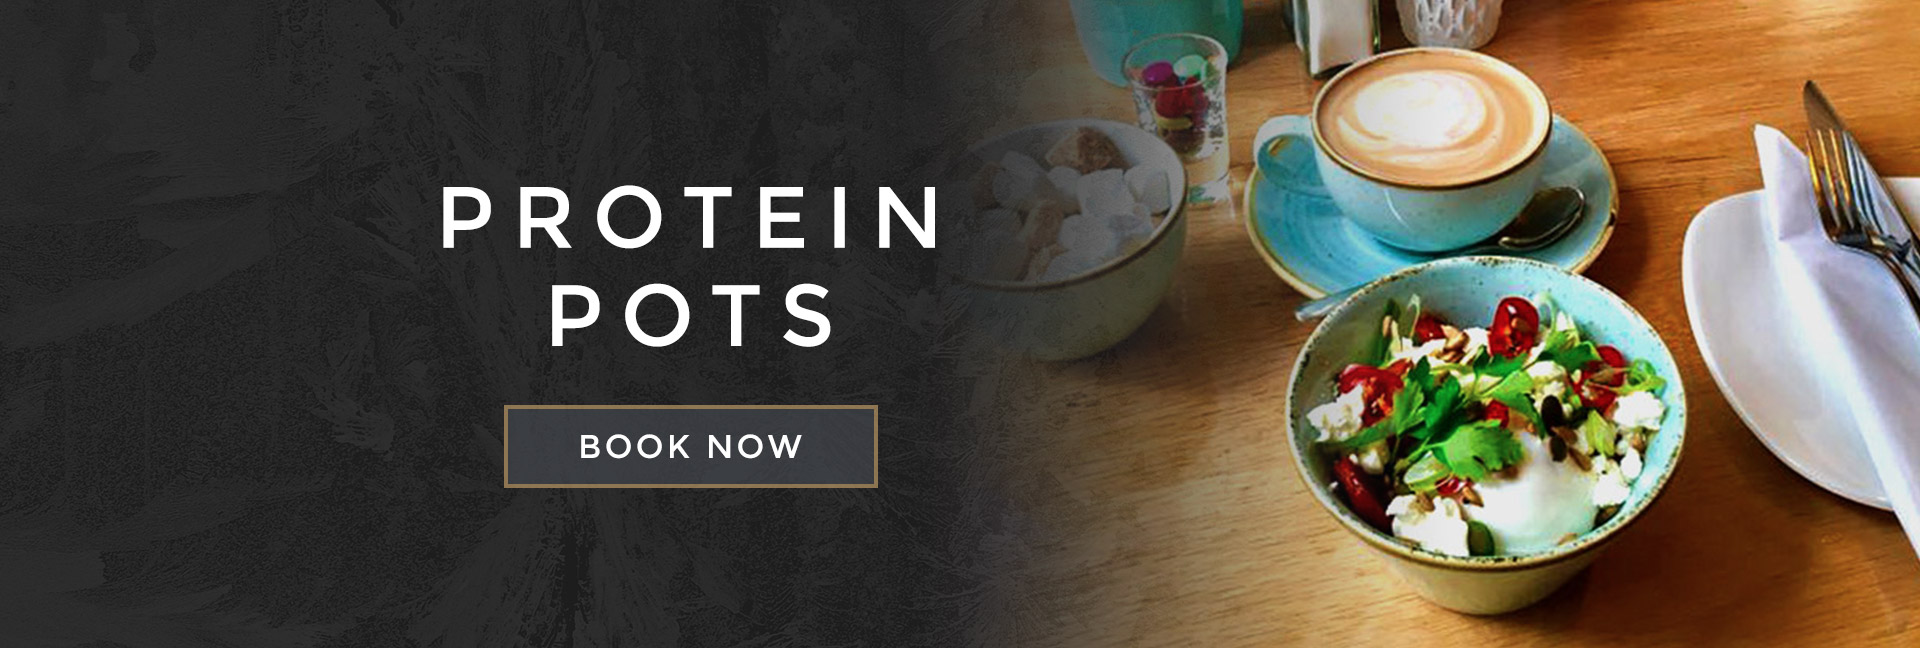 Protein pots at All Bar One Cannon Street - Book your table